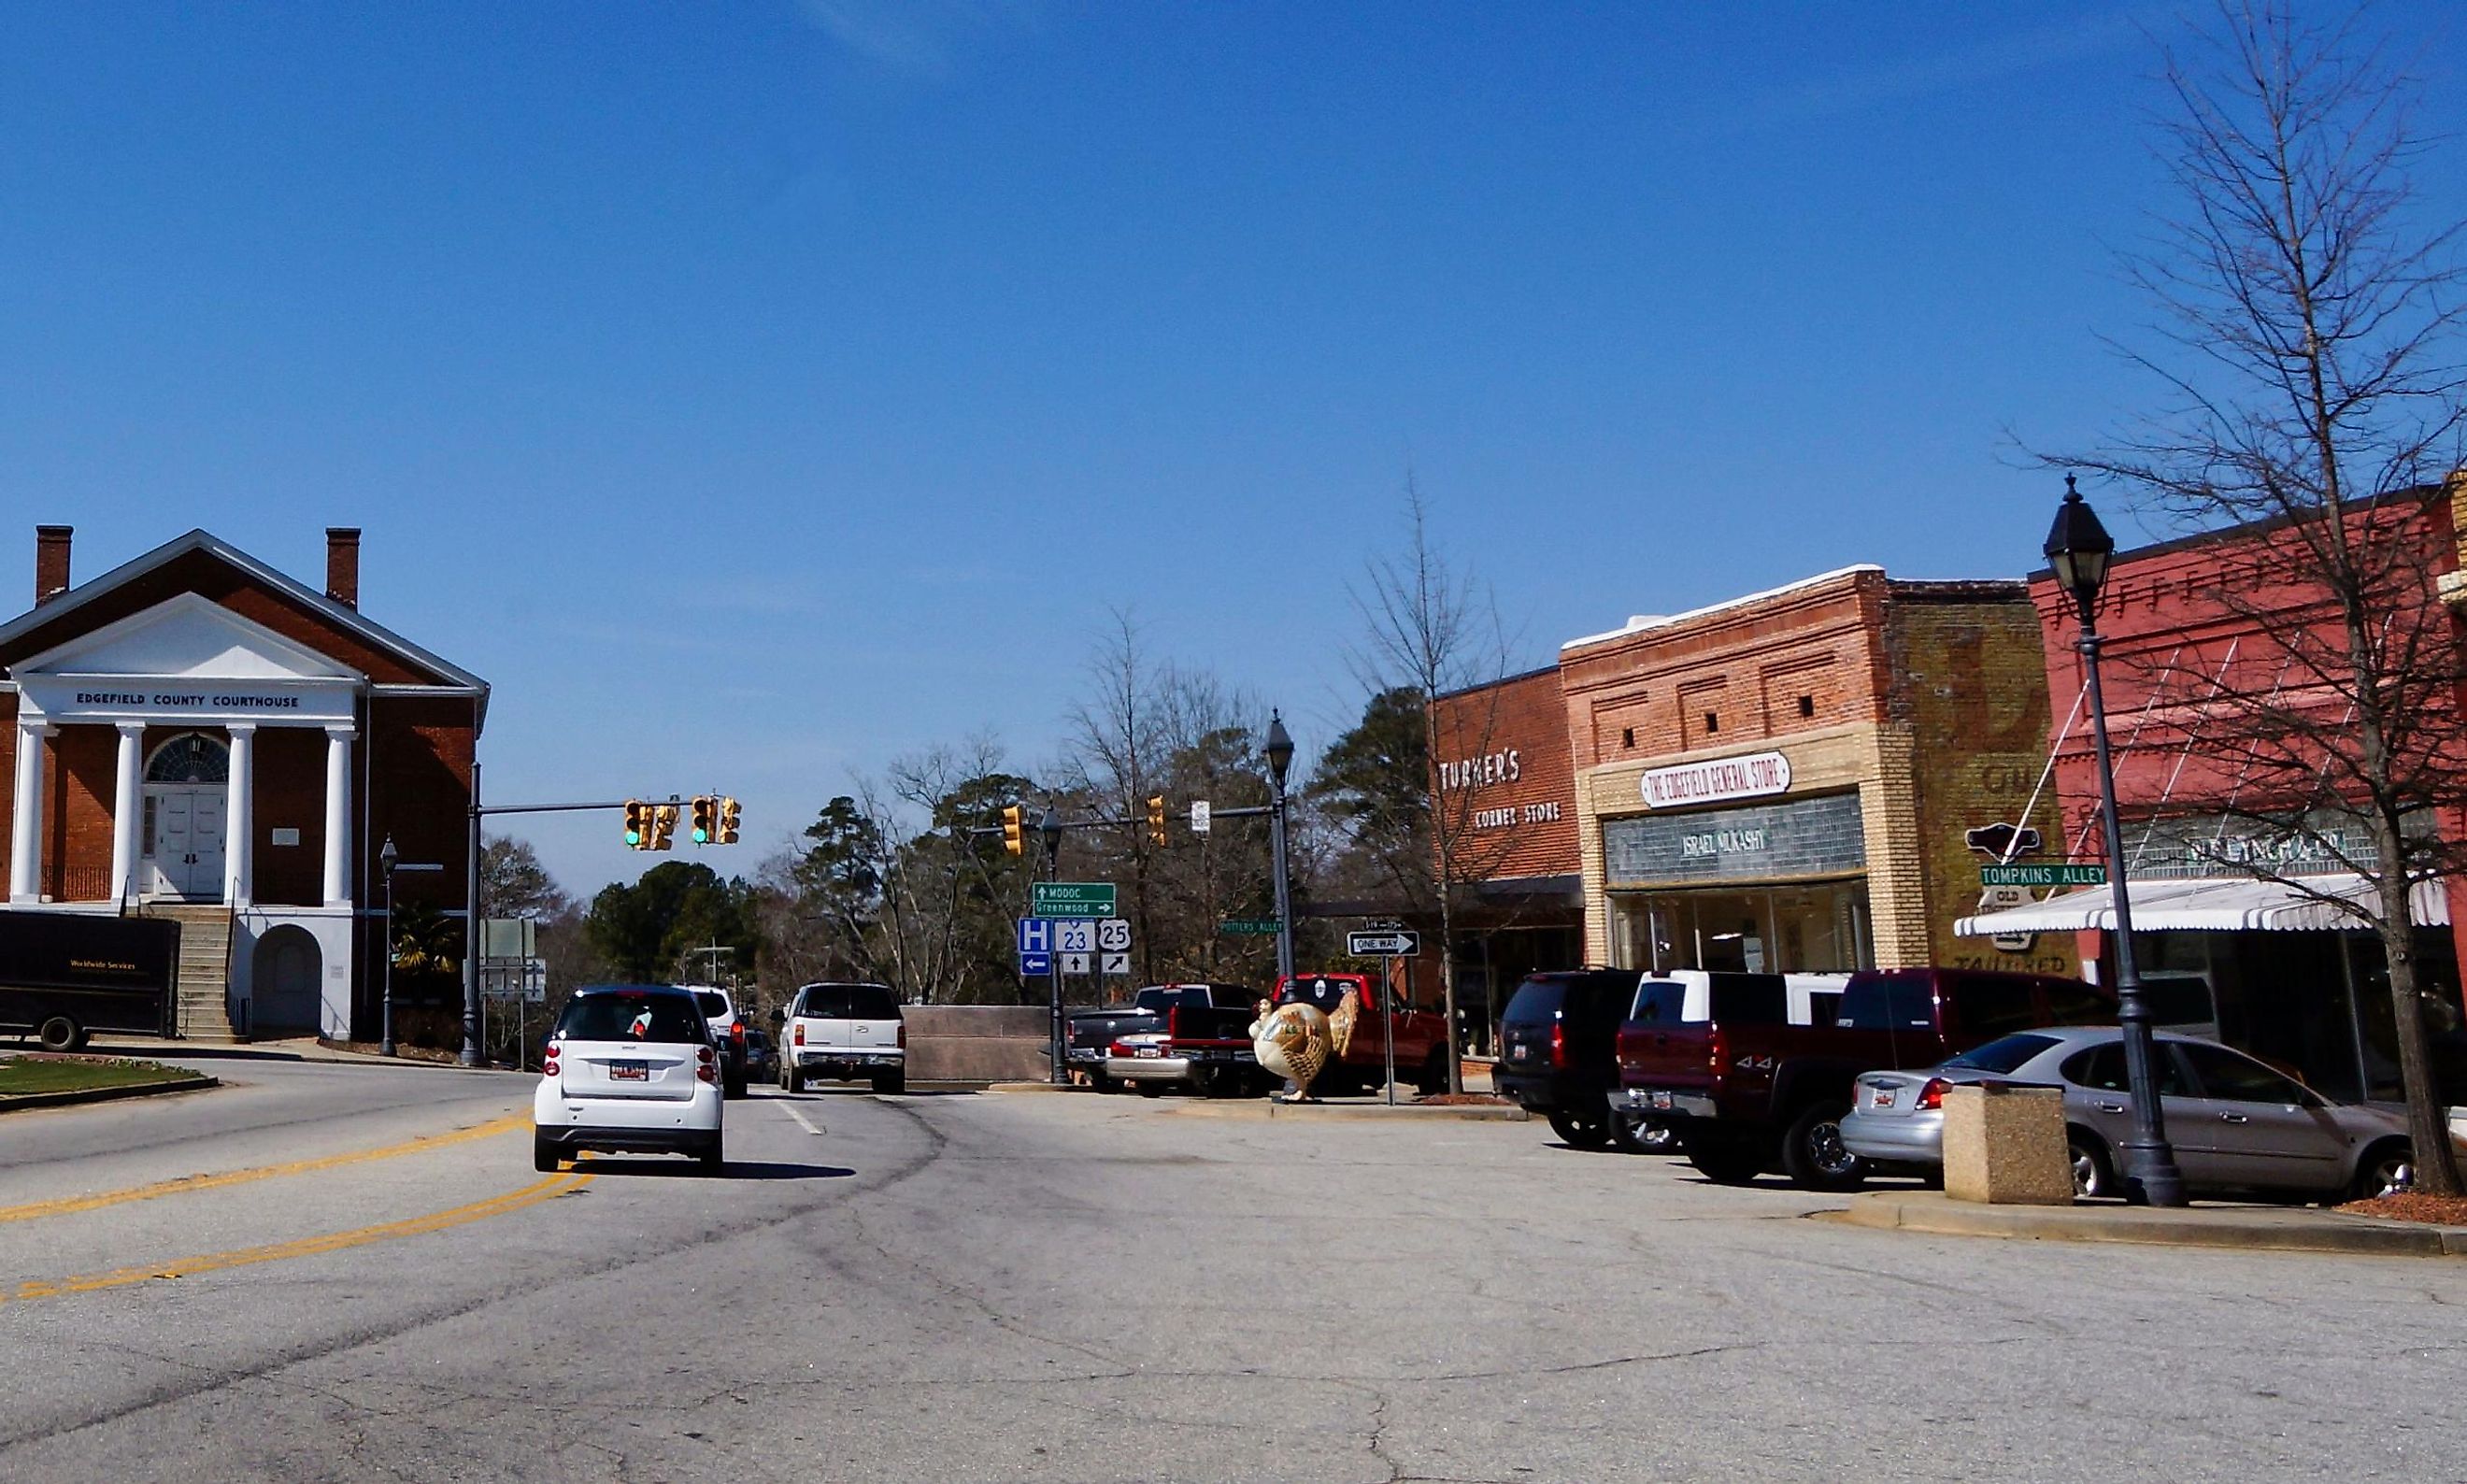 Downtown Edgefield in South Carolina